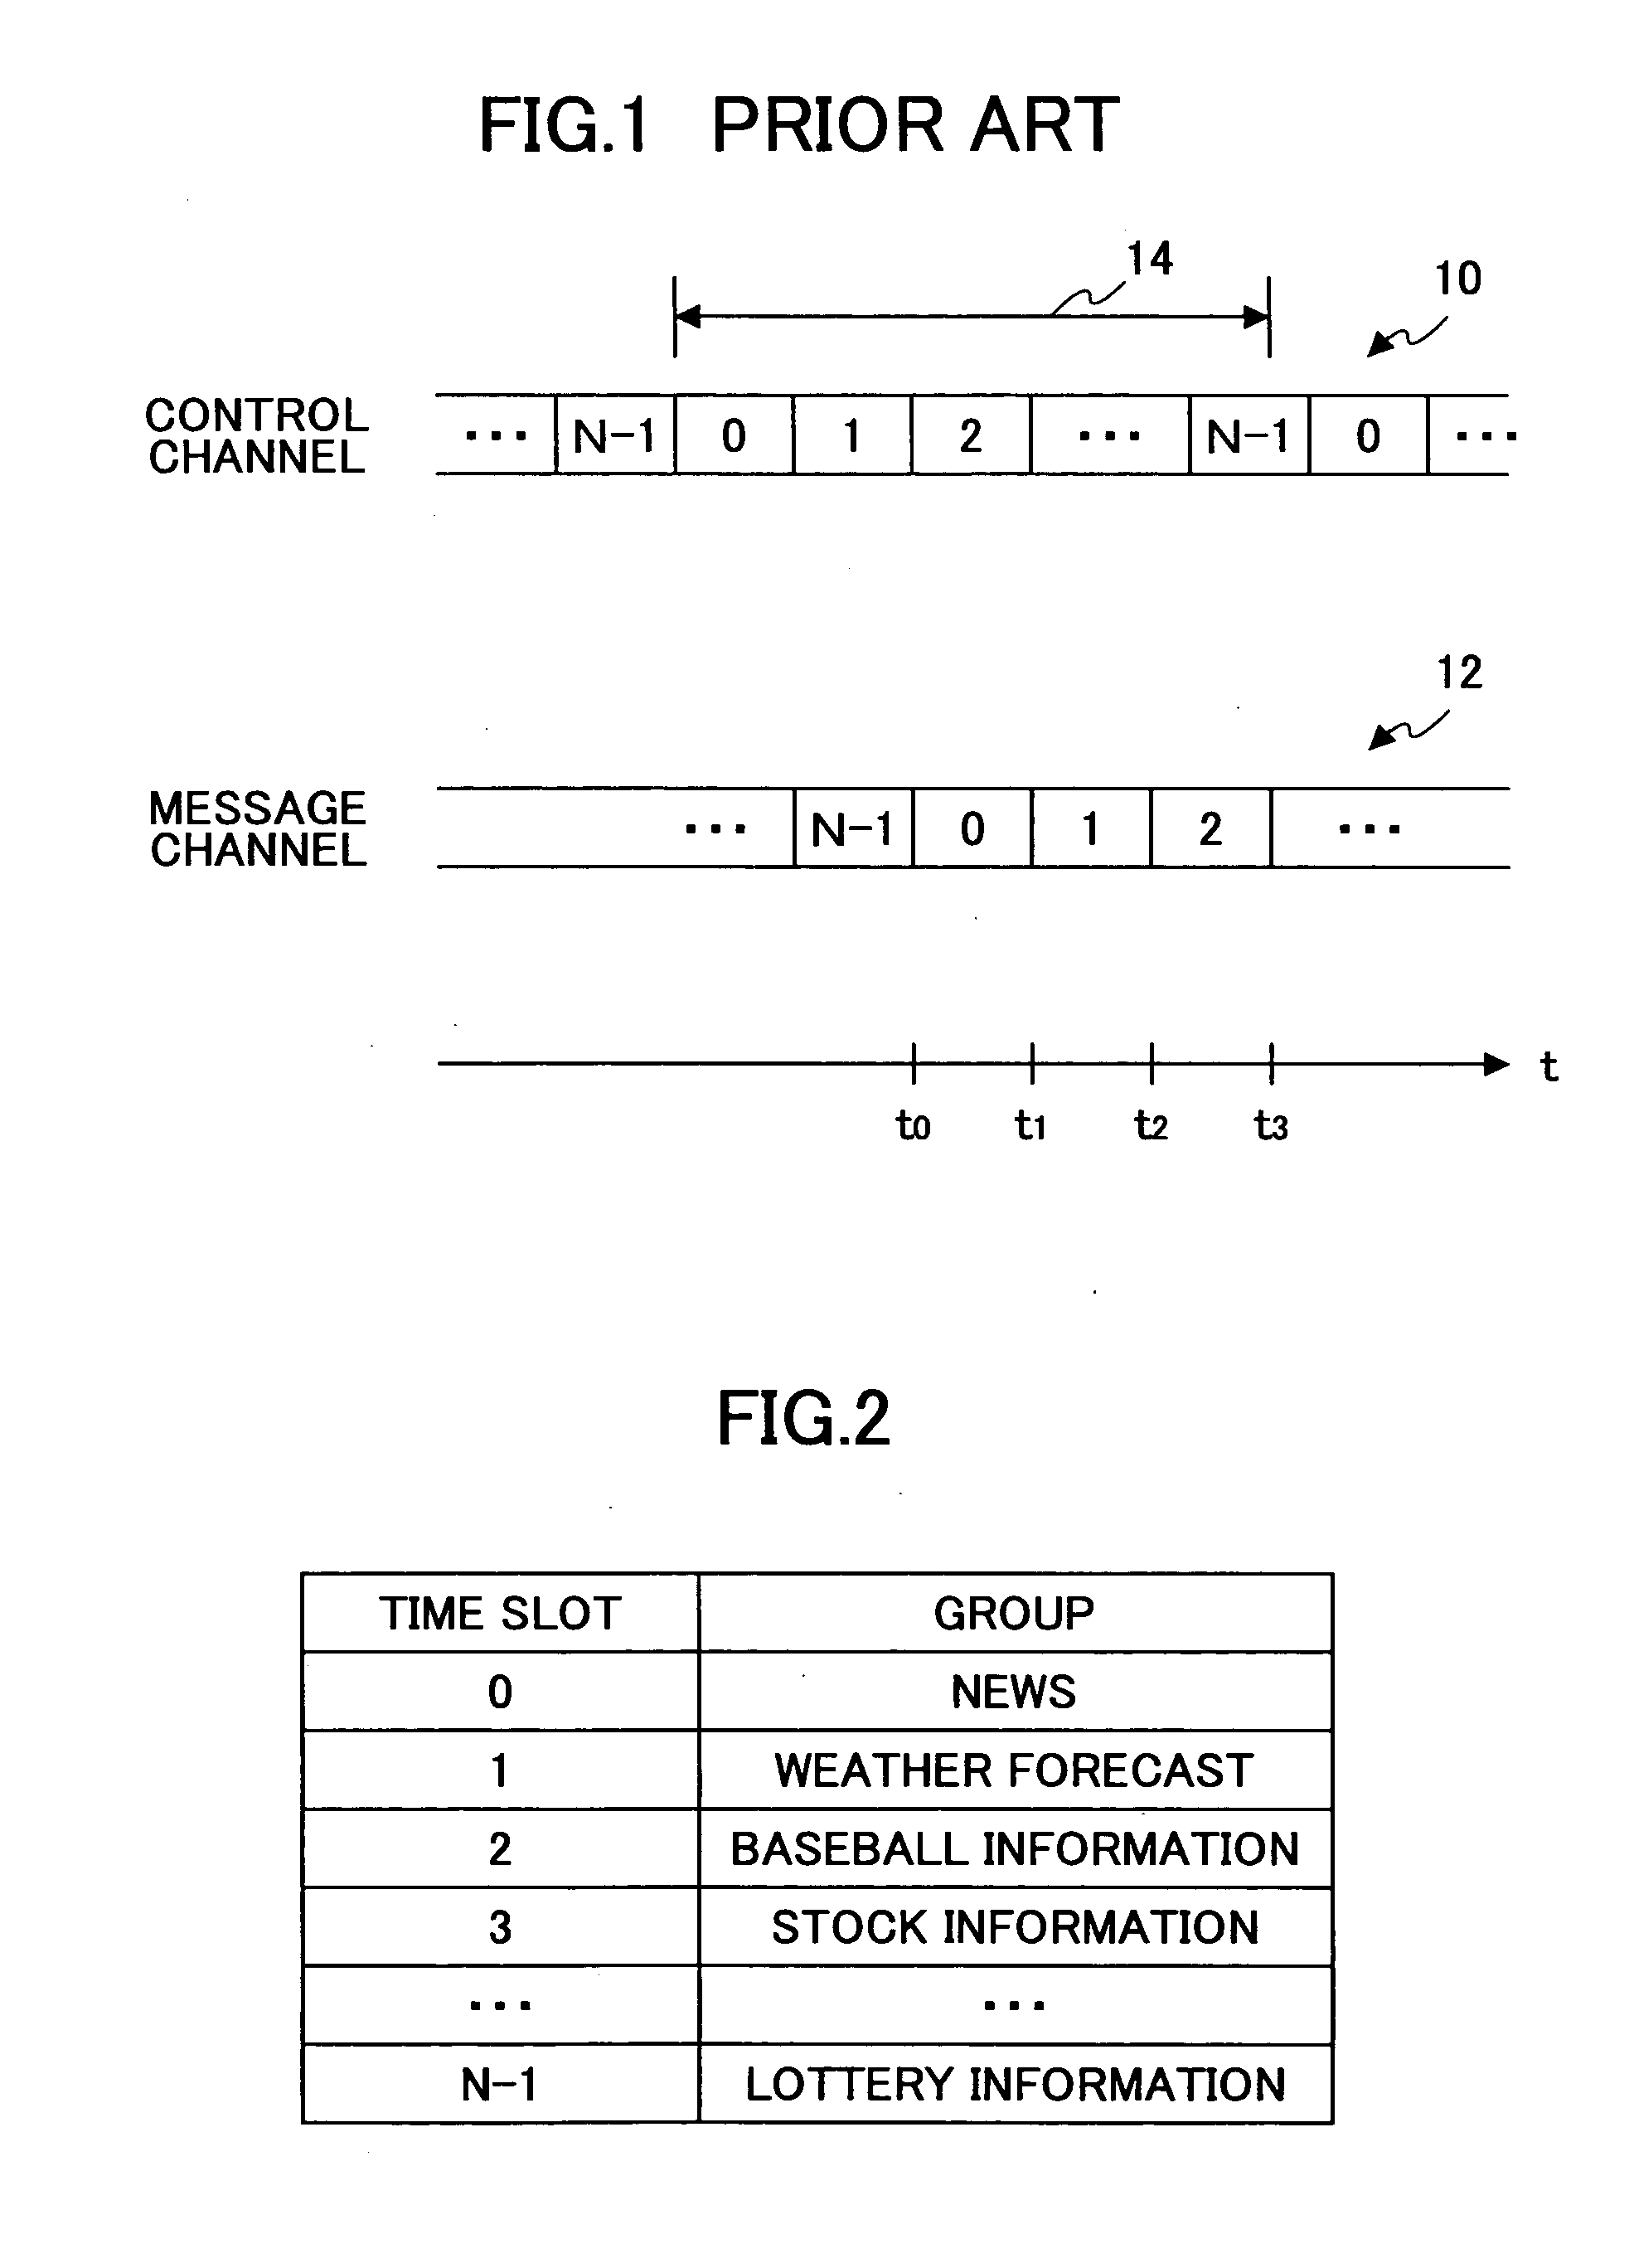 Information downloading apparatus and mobile terminal